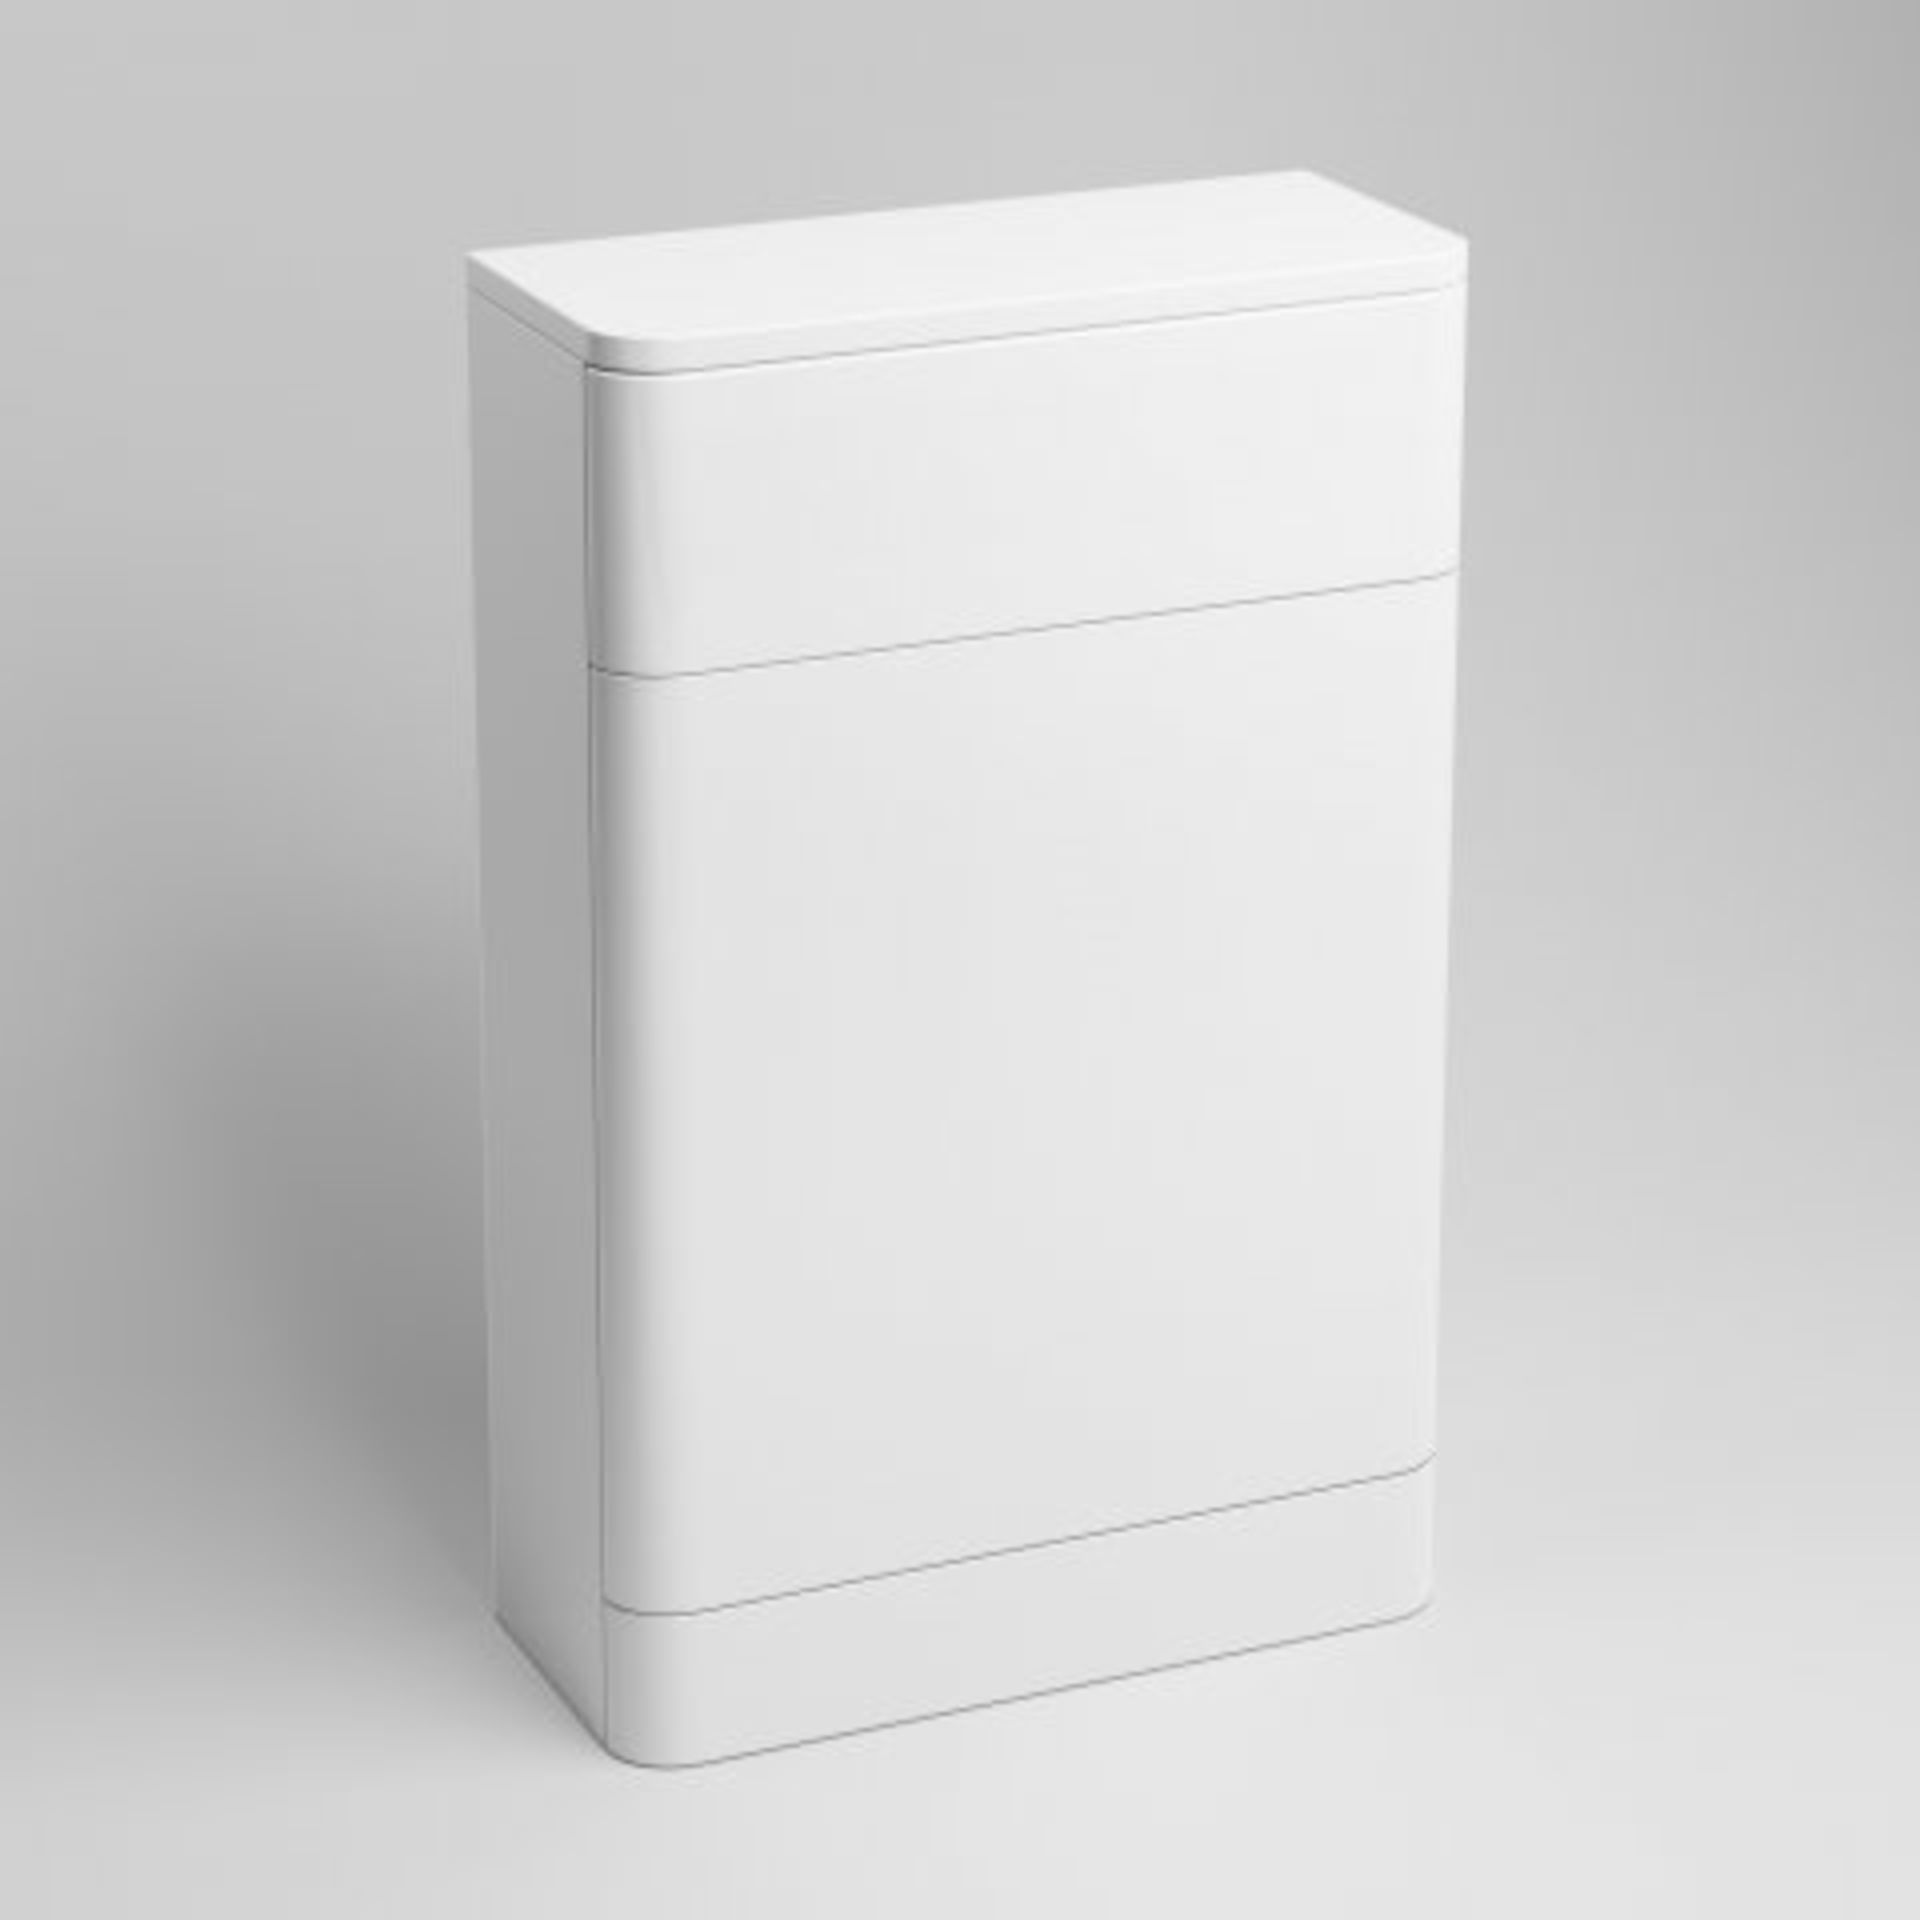 (A155) 500mm Gloss White Back To Wall Toilet Unit This Gloss White 500mm Back To Wall Toilet Unit is